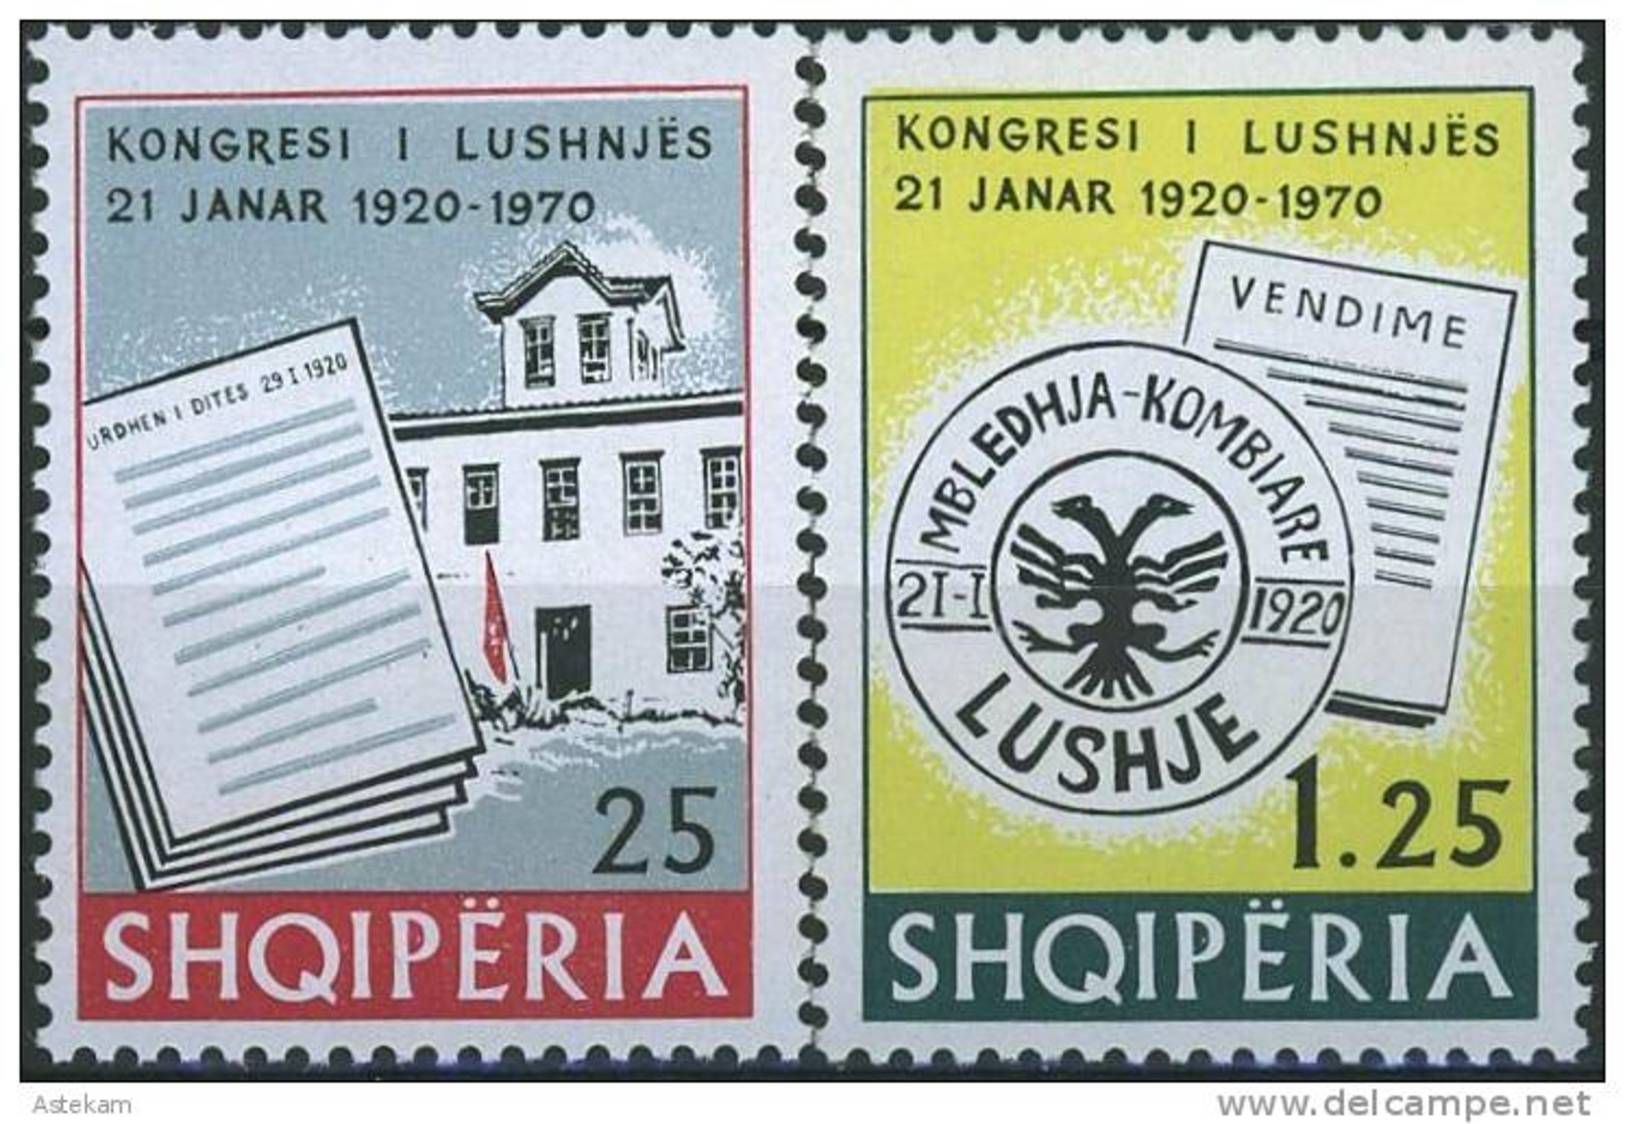 ALBANIA 1970, 50 Years Since The CONGRESS In LUSHNJA, COMPLETE, MNH SET, GOOD QUALITY, *** - Albania